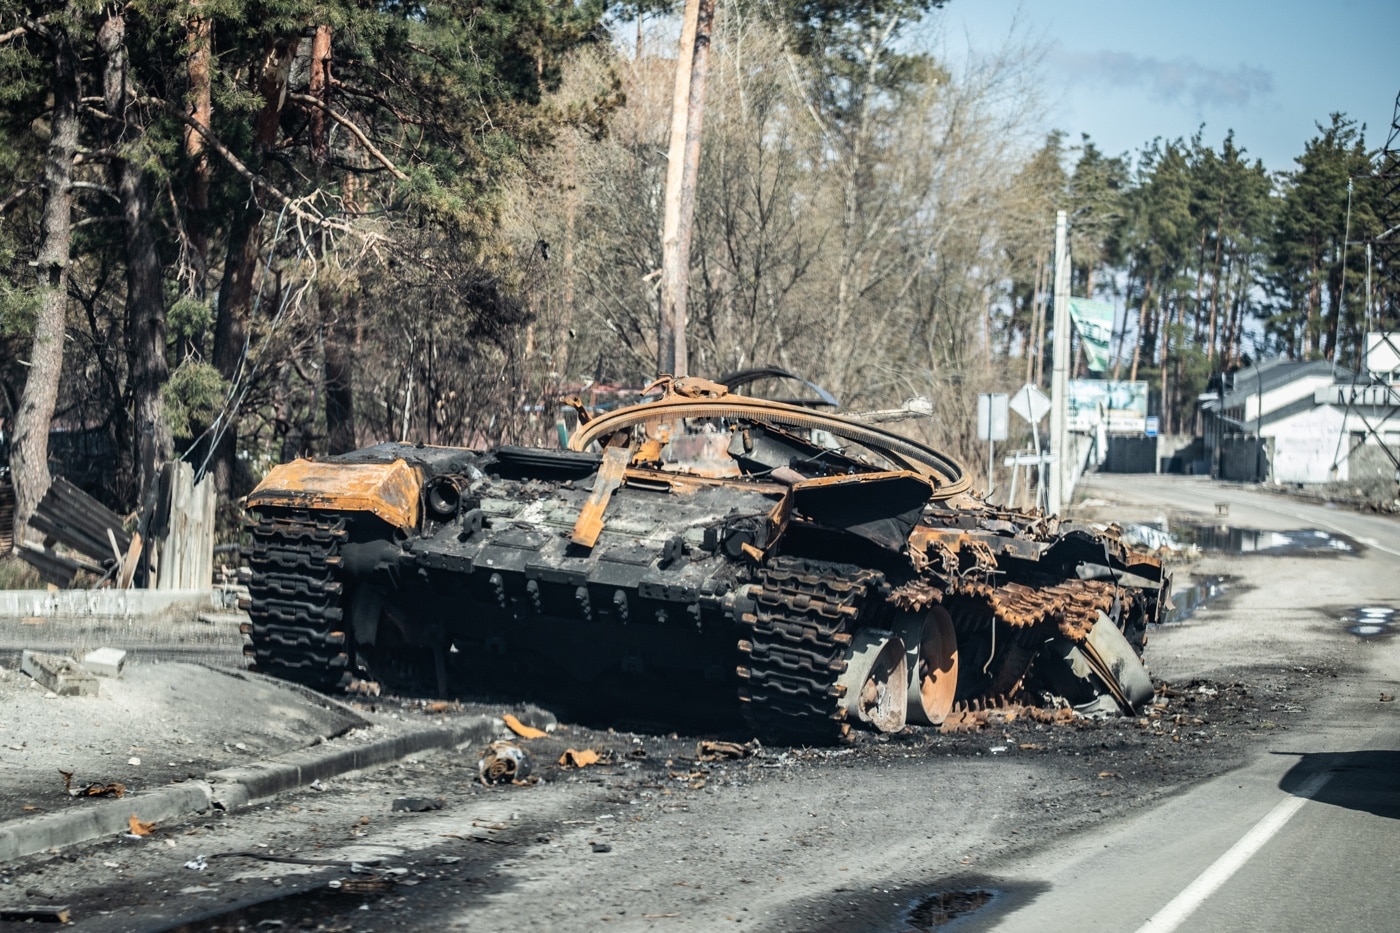 In this photograph, we see a destroyed Russian T-80 tank. Casualties on the Russian side were high as Ukrainian defenses at the battle were tenacious fighters determined on preventing Russian control of their country.